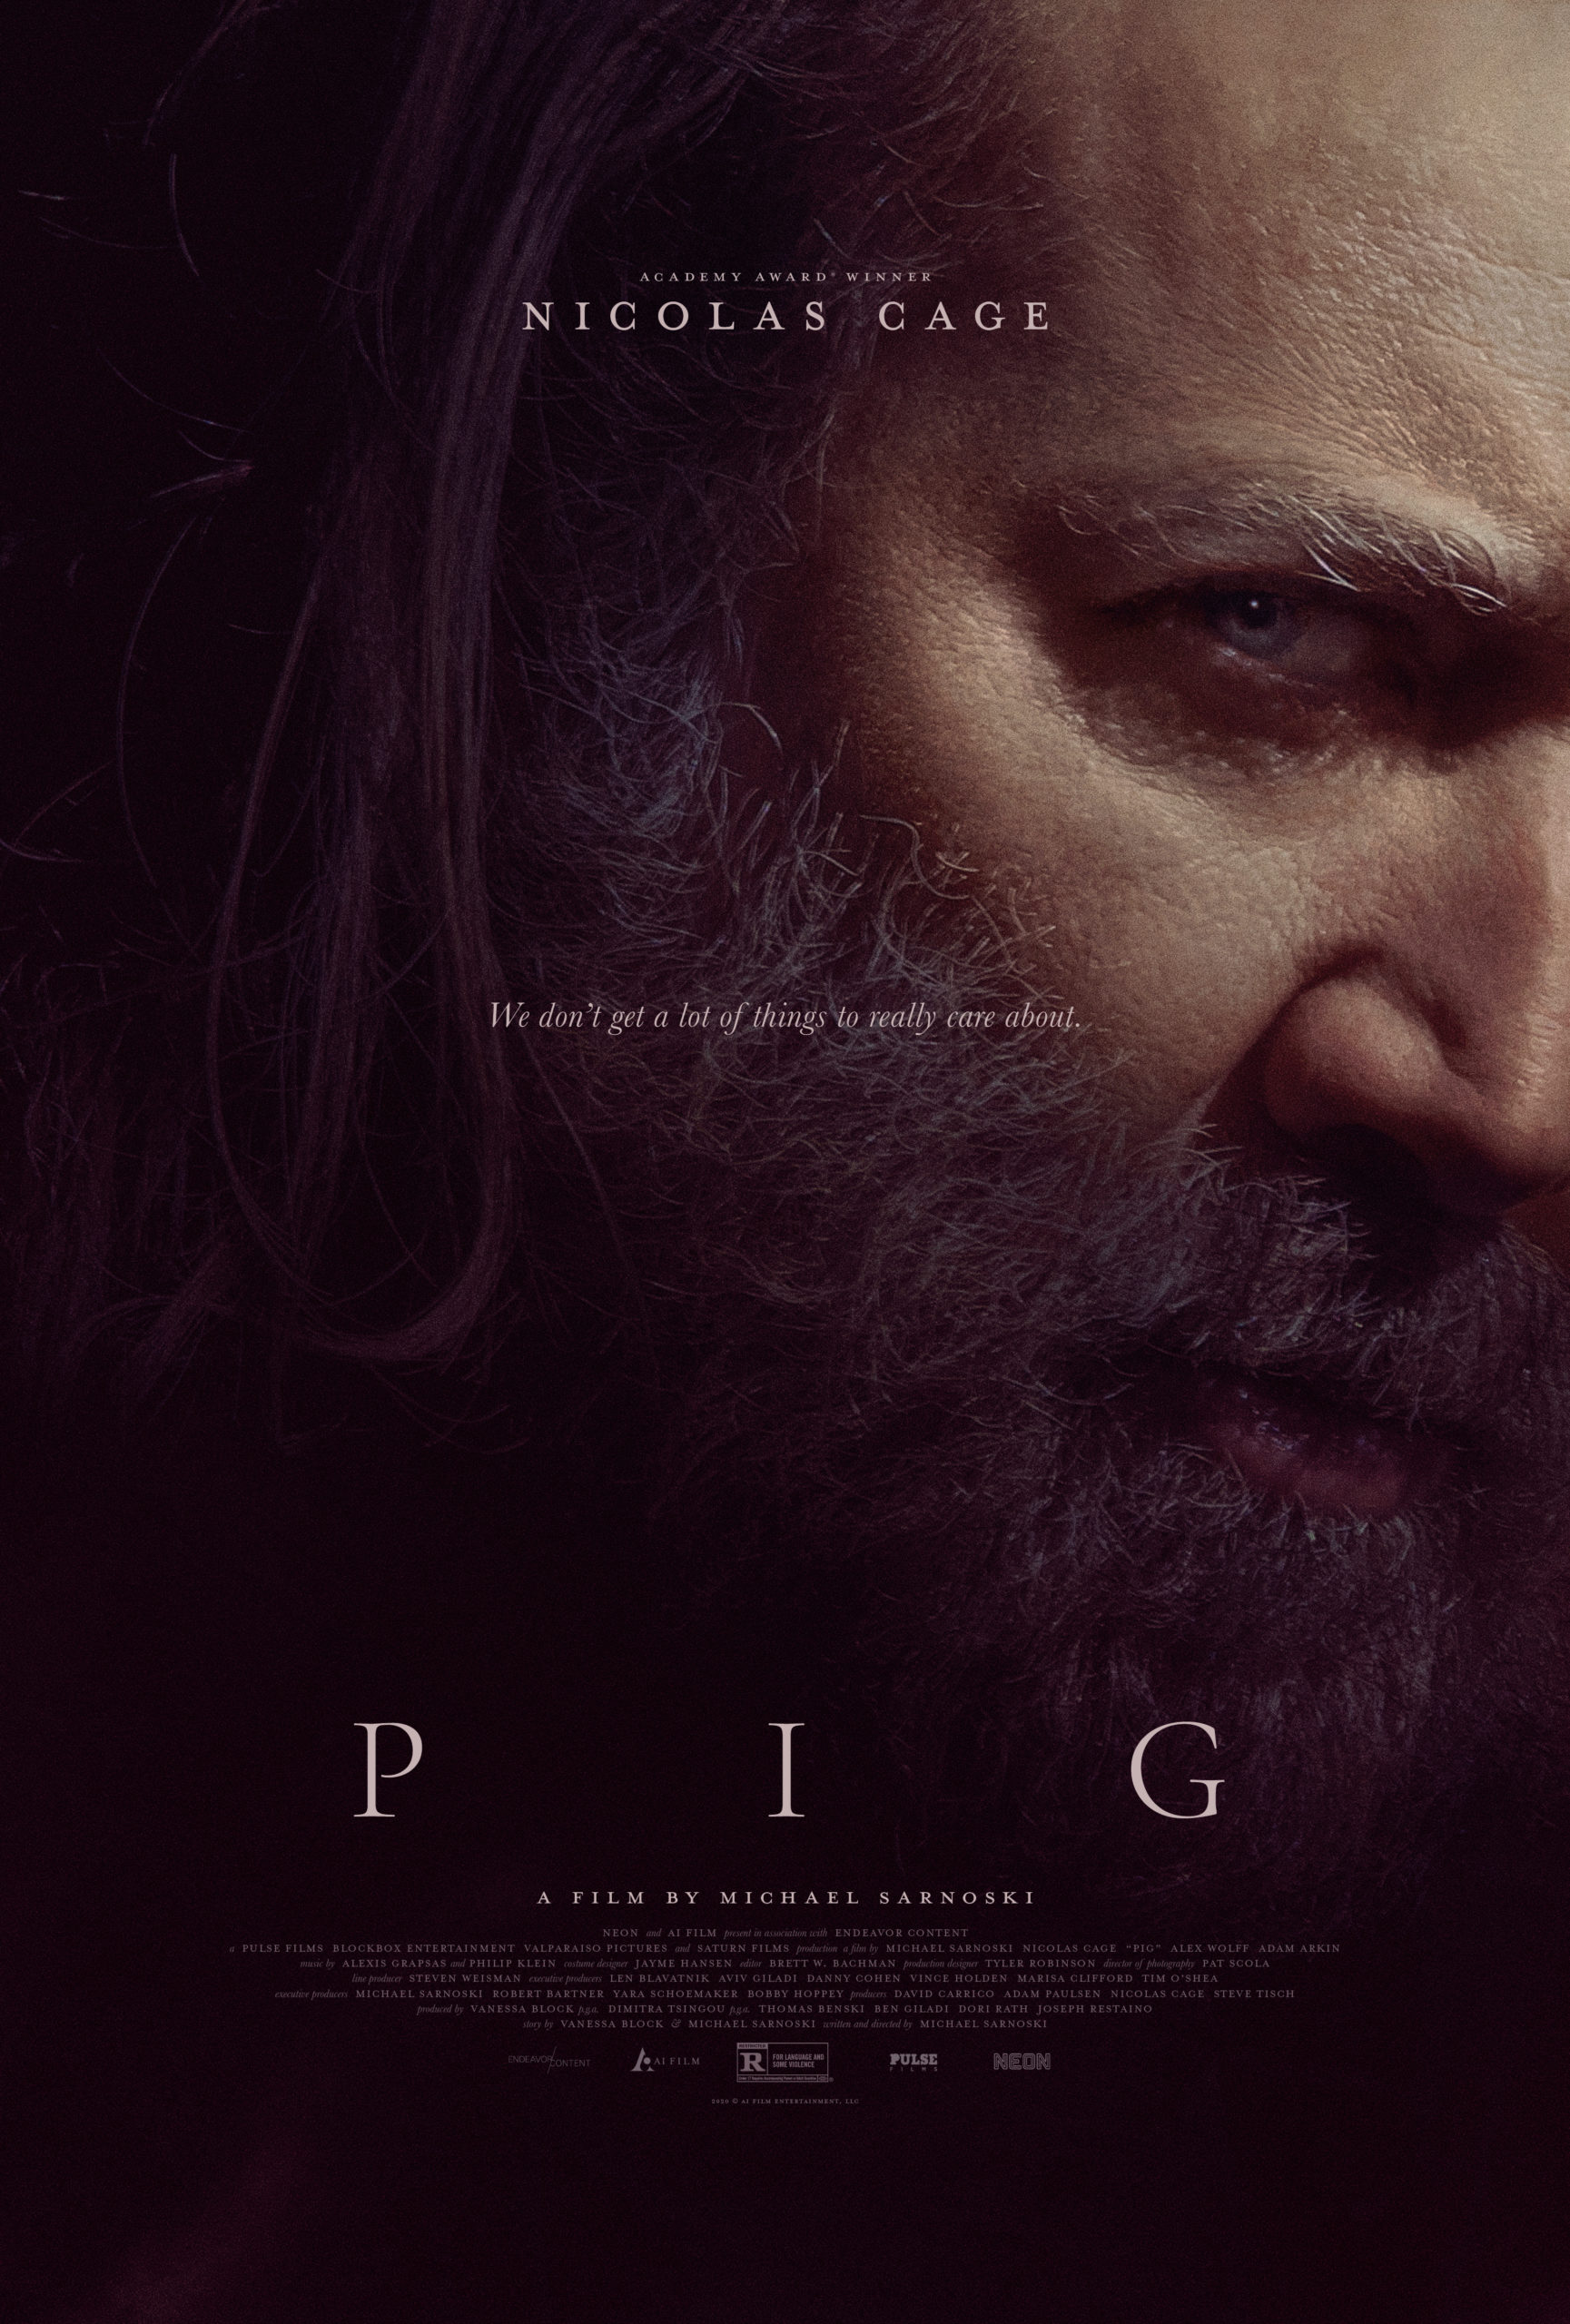 Pig Poster with Nicolas Cage